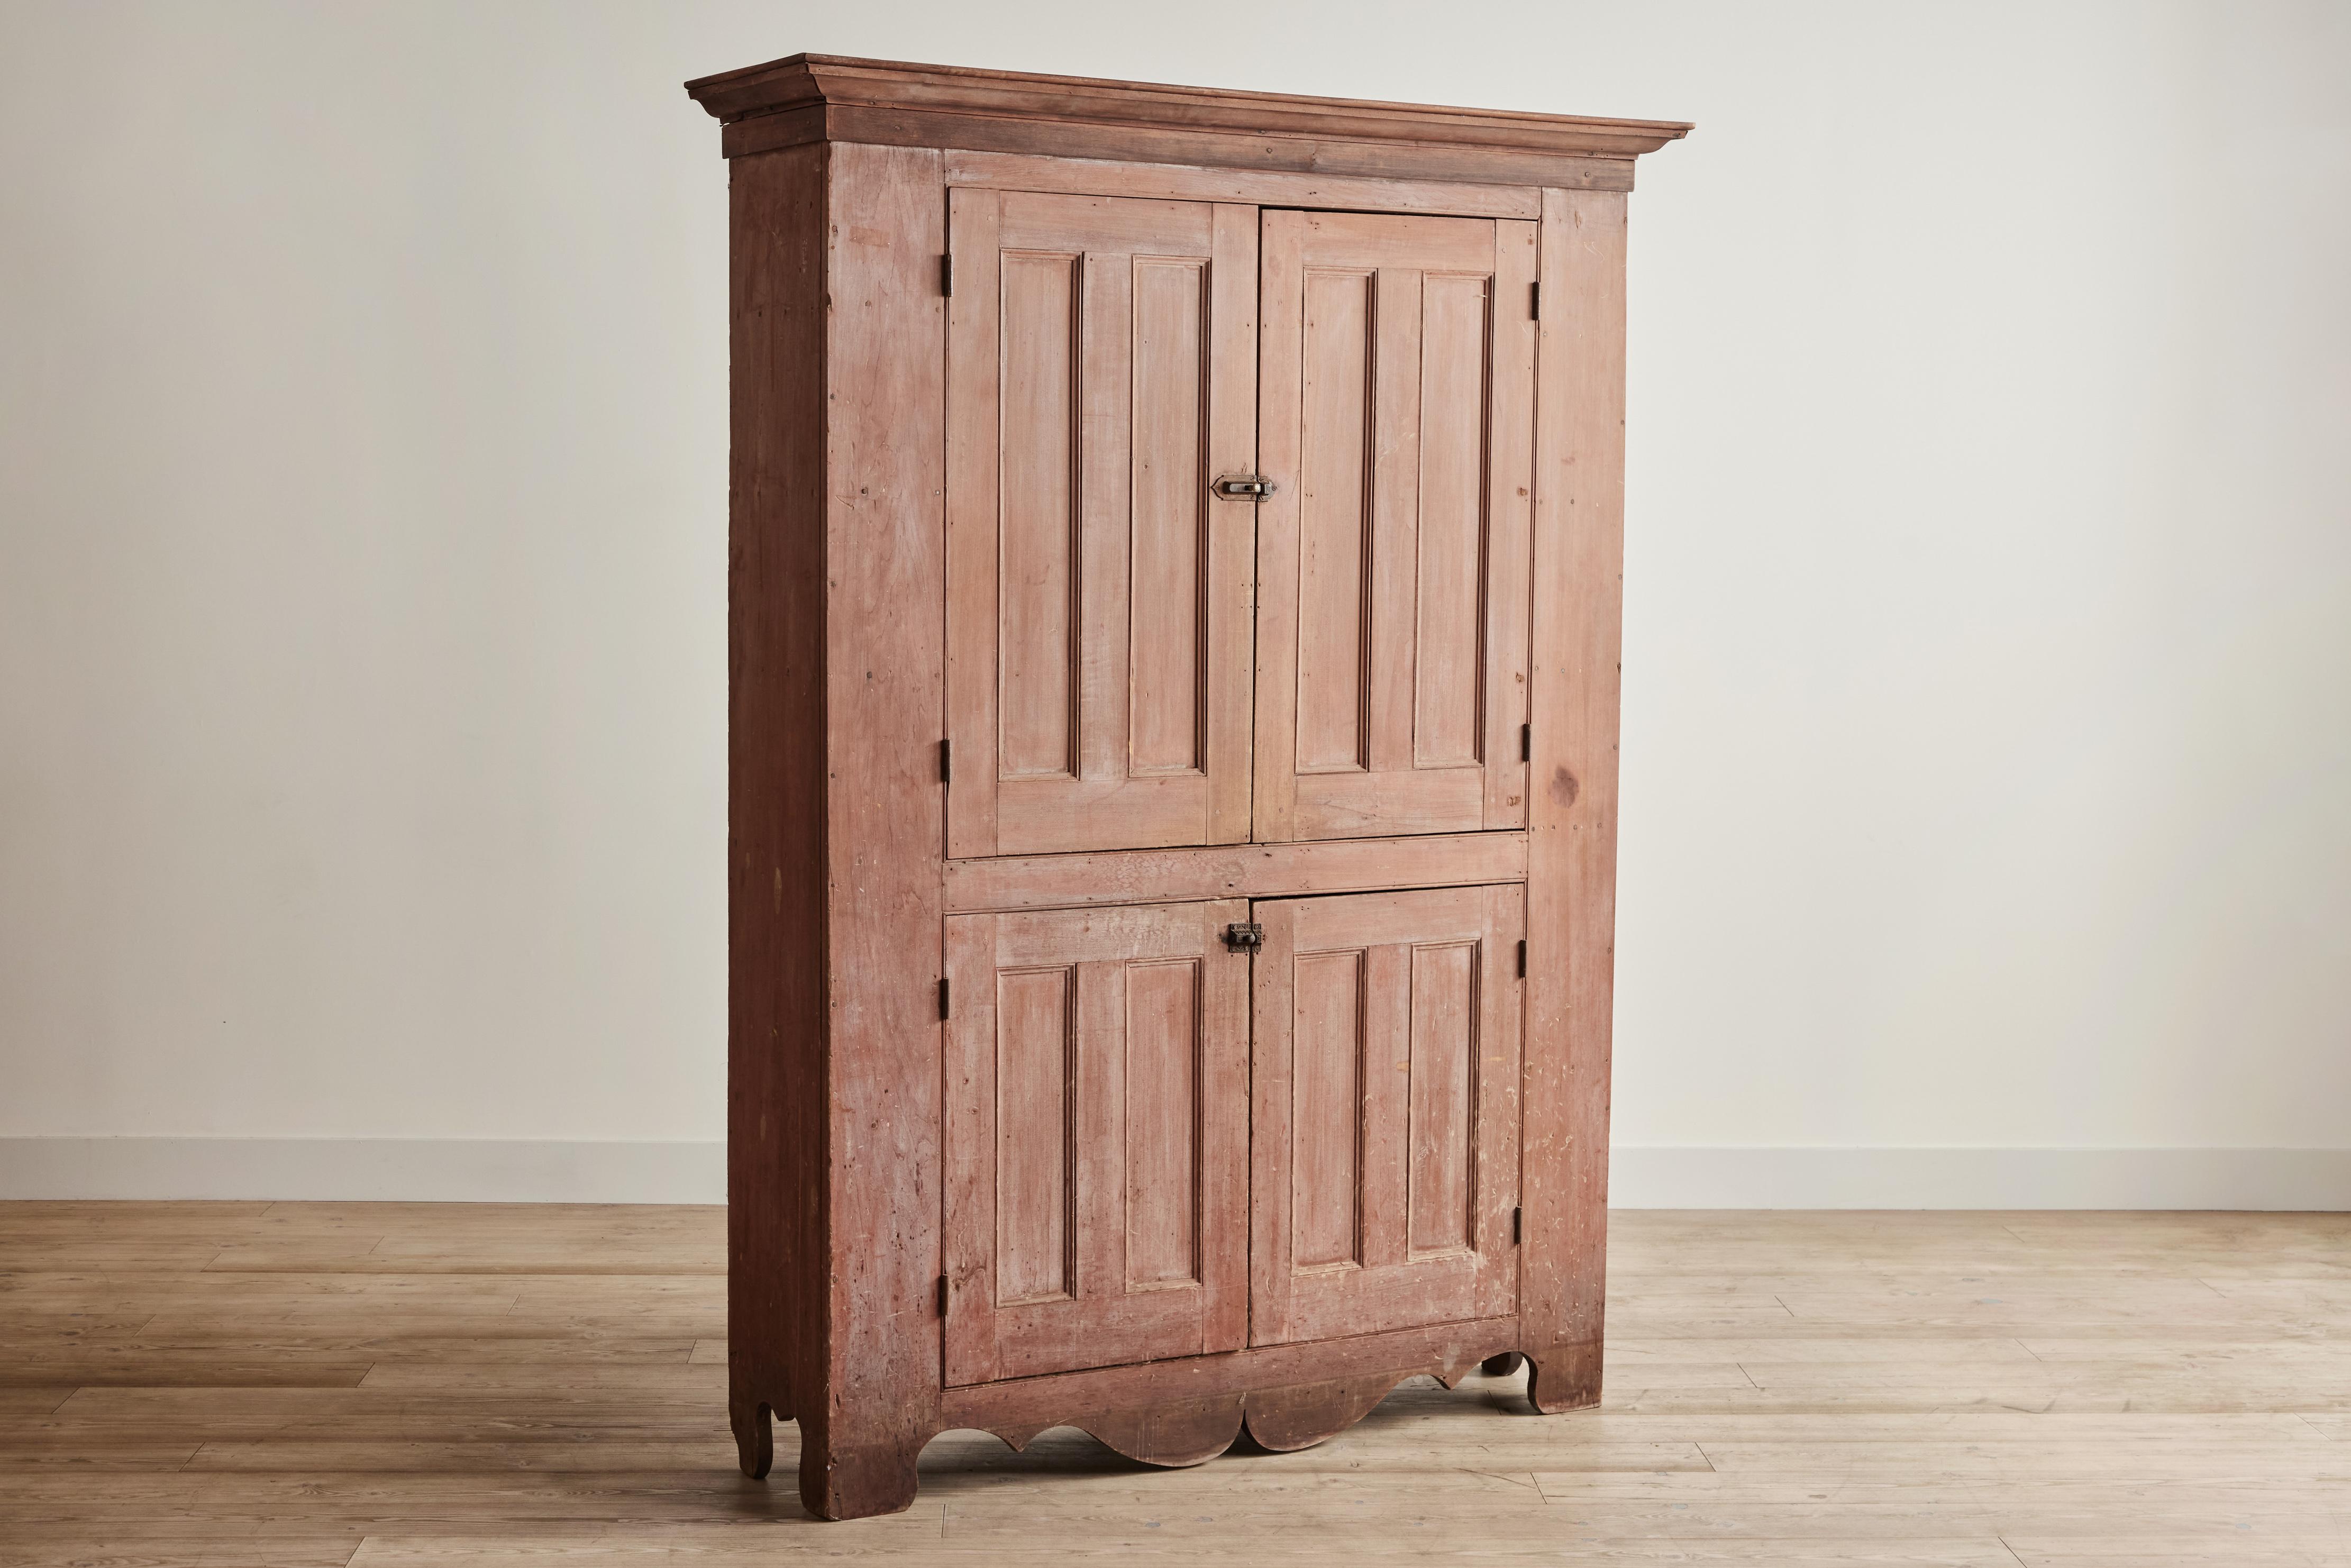 Large early American wood cupboard painted a faint salmon color. Cabinet has two large compartments with interior shelving for storage. Wear throughout it consistent with age and use. 